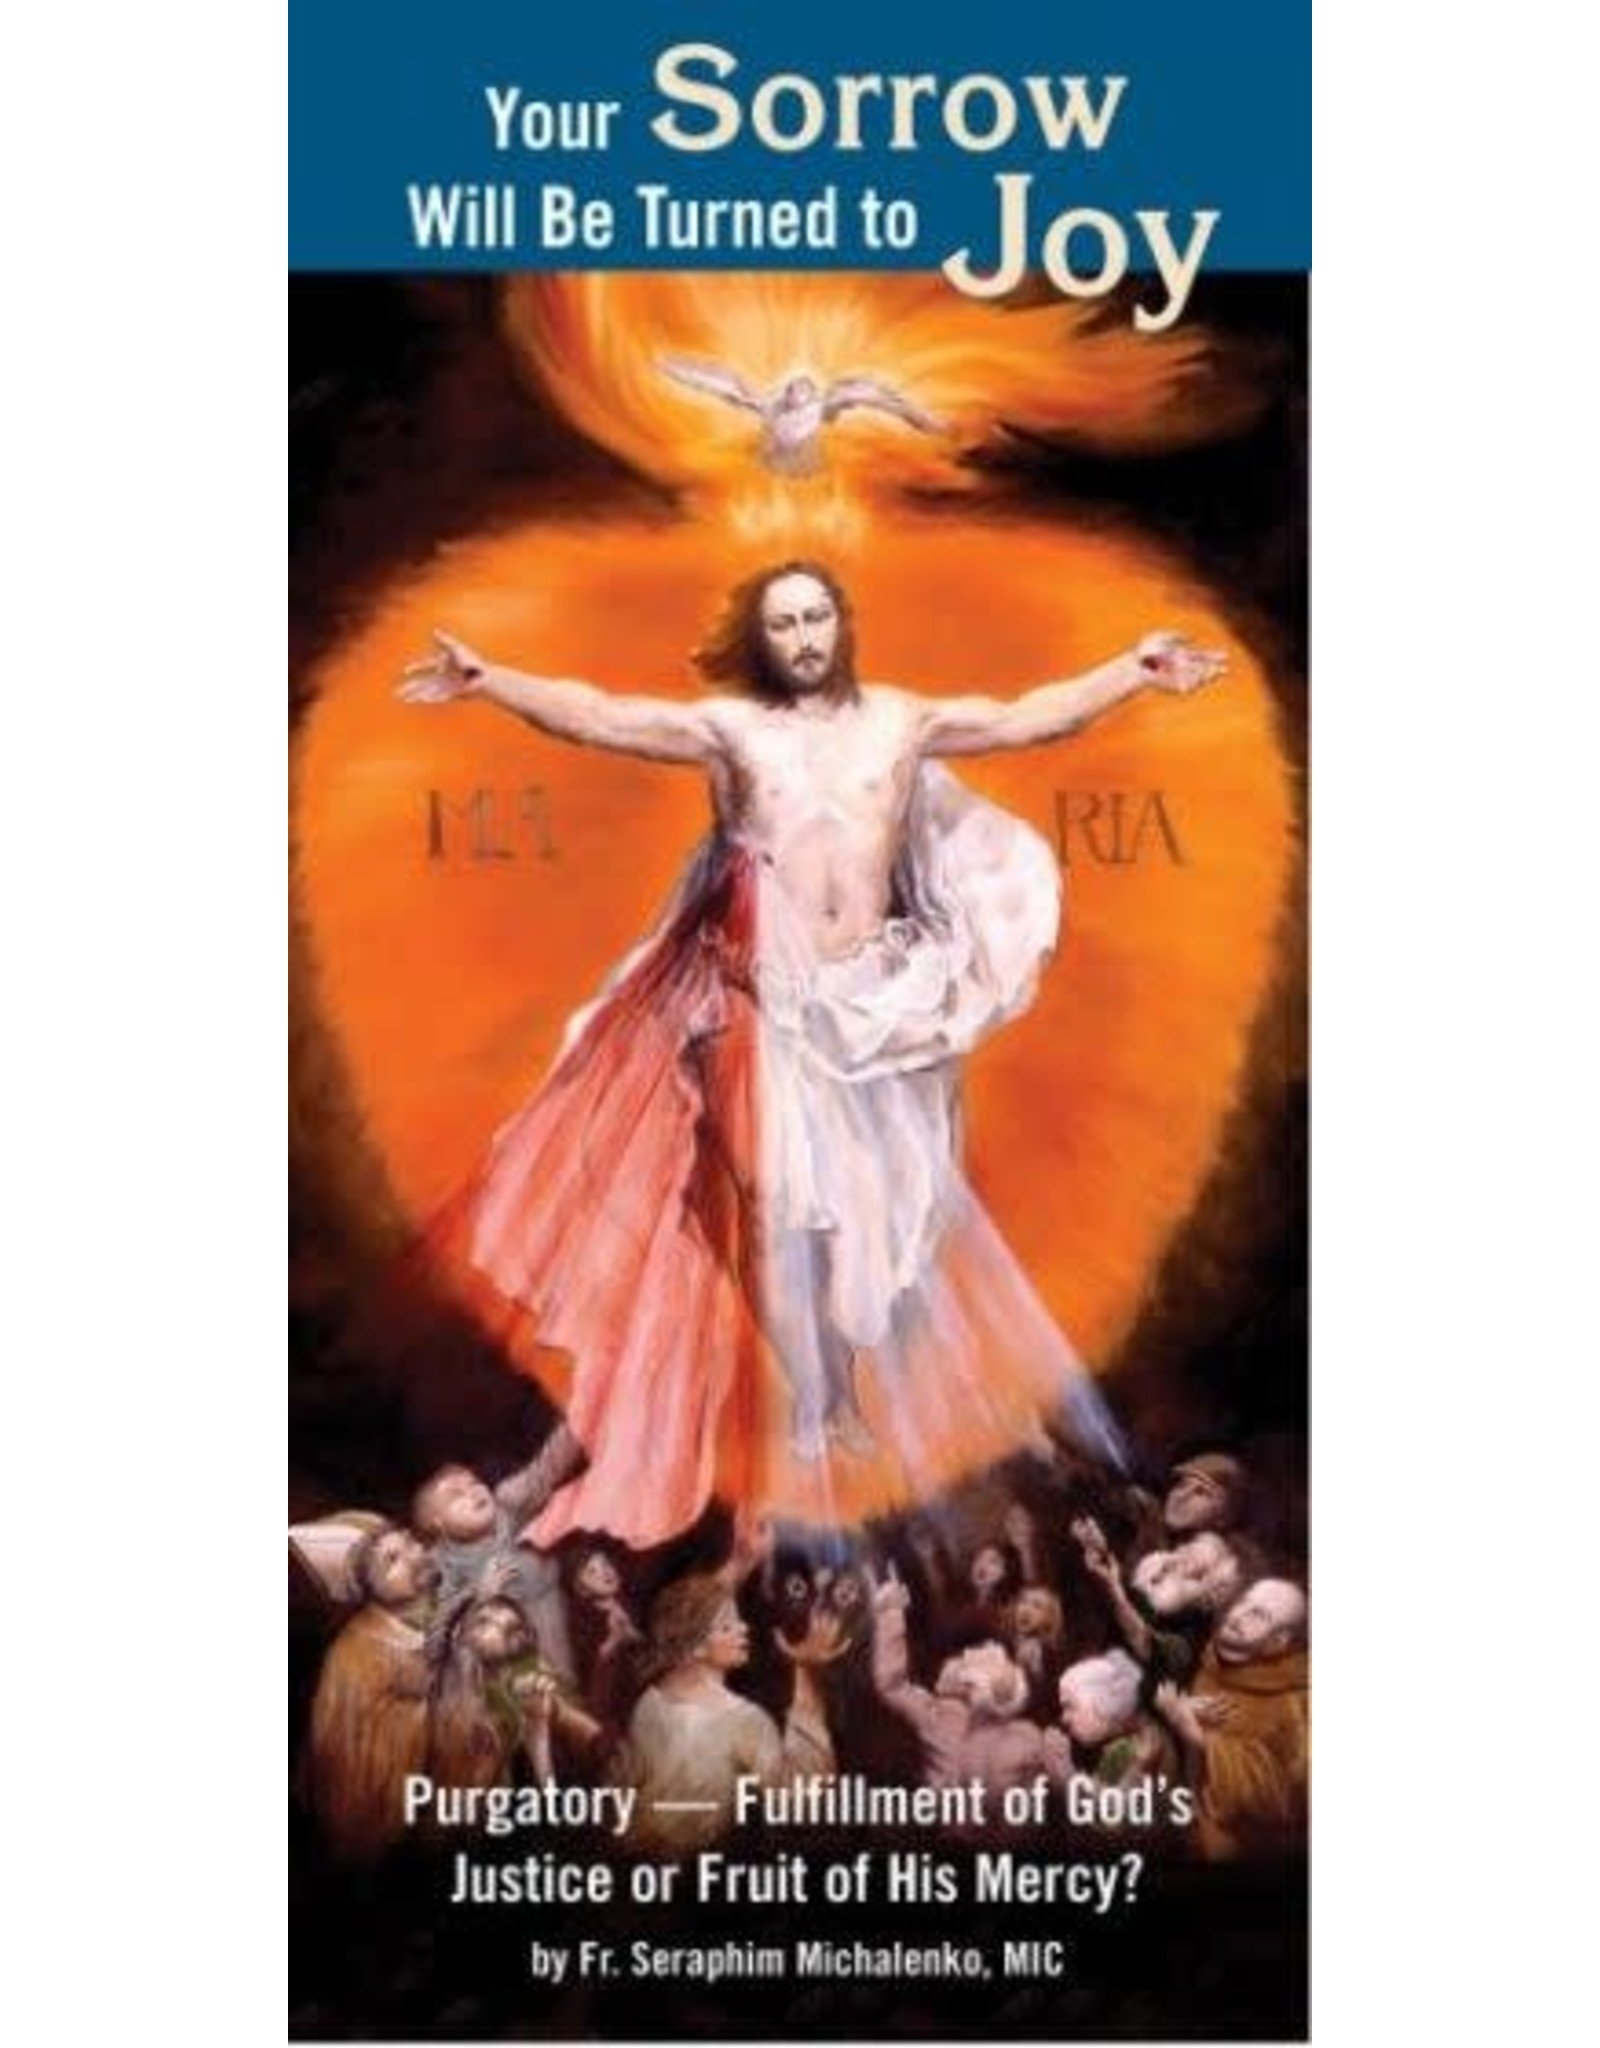 Association of Marian Helpers YOUR SORROW WILL BE TURNED TO JOY PAMPHLET